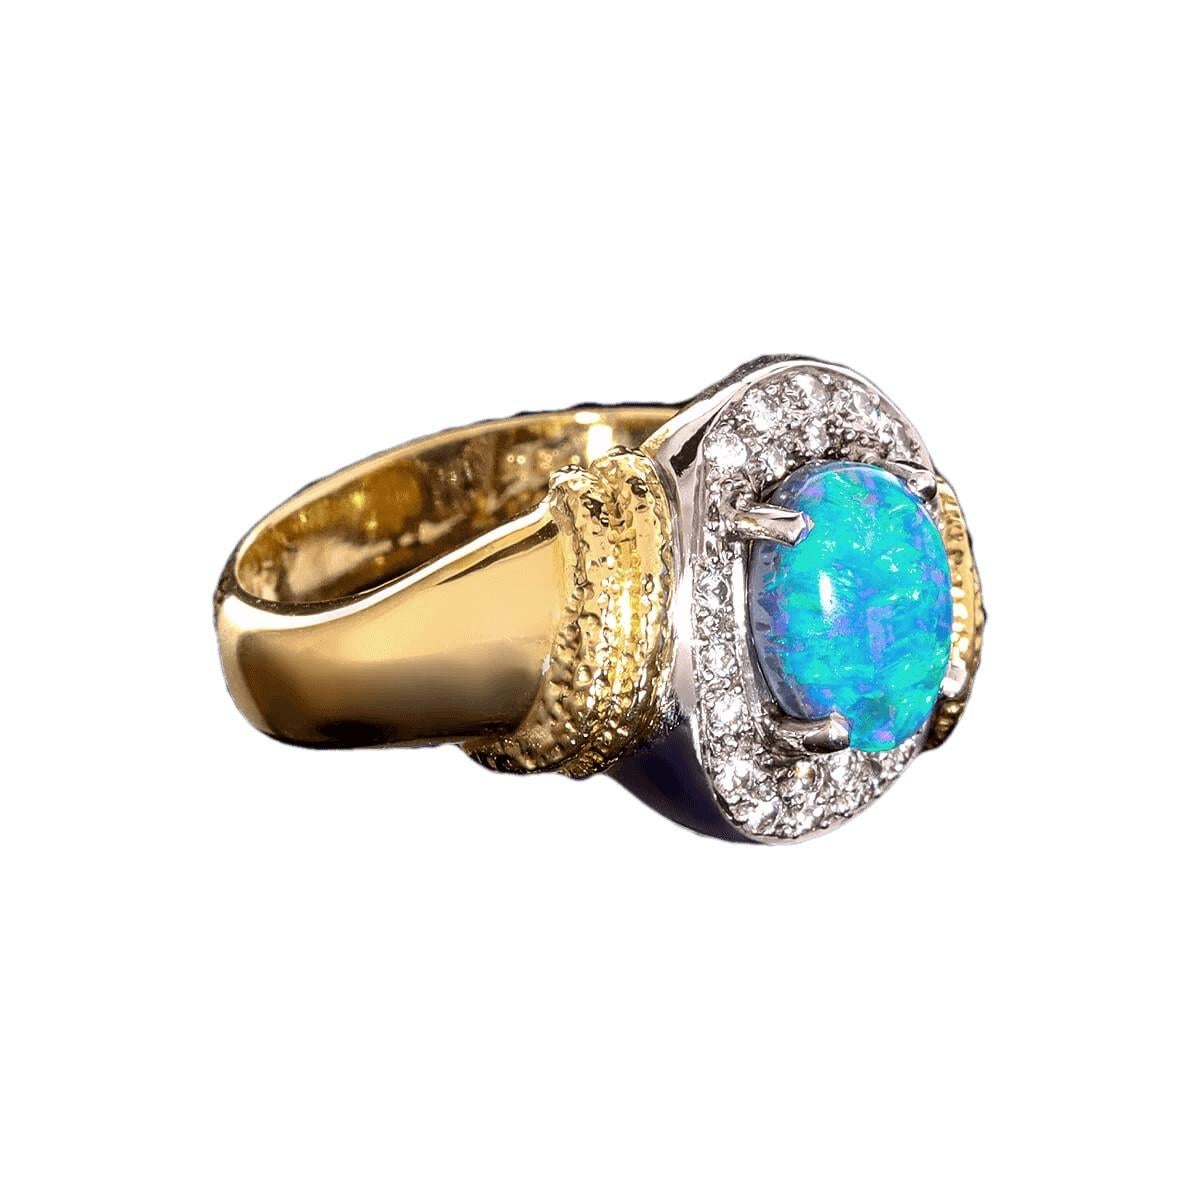 To say this stone is vivid is an understatement. The blue and greens are so intense you will find yourself lost in their beauty. Solid 18K gold ring with a magnificent blue-green solid Australian Black Opal, surrounded by brilliant white diamonds